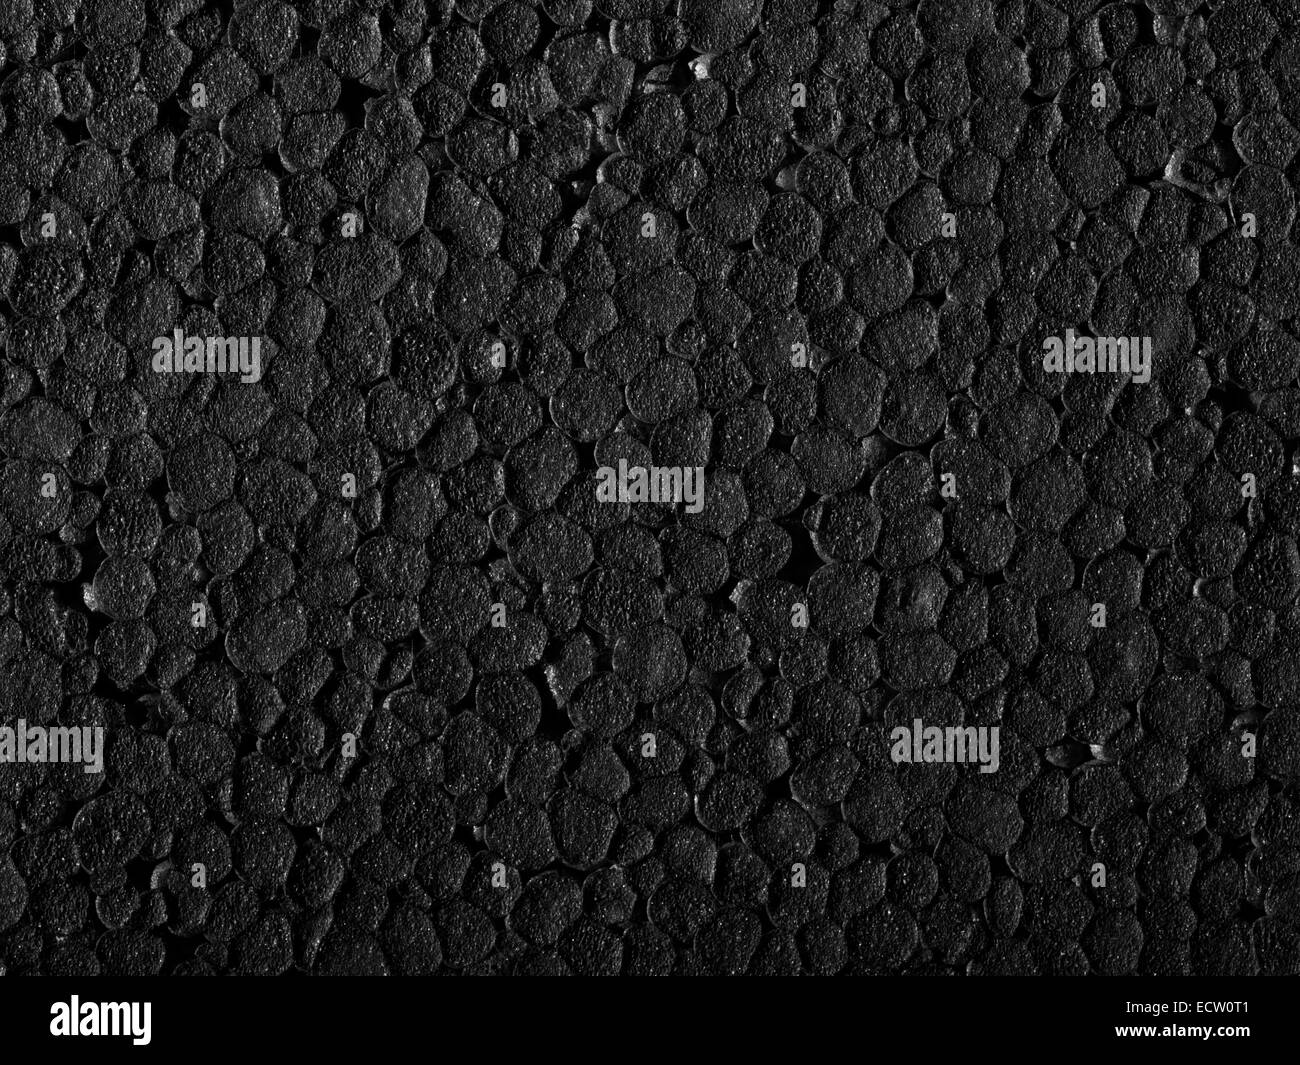 Full frame closeup of a black Polystyrene surface Stock Photo